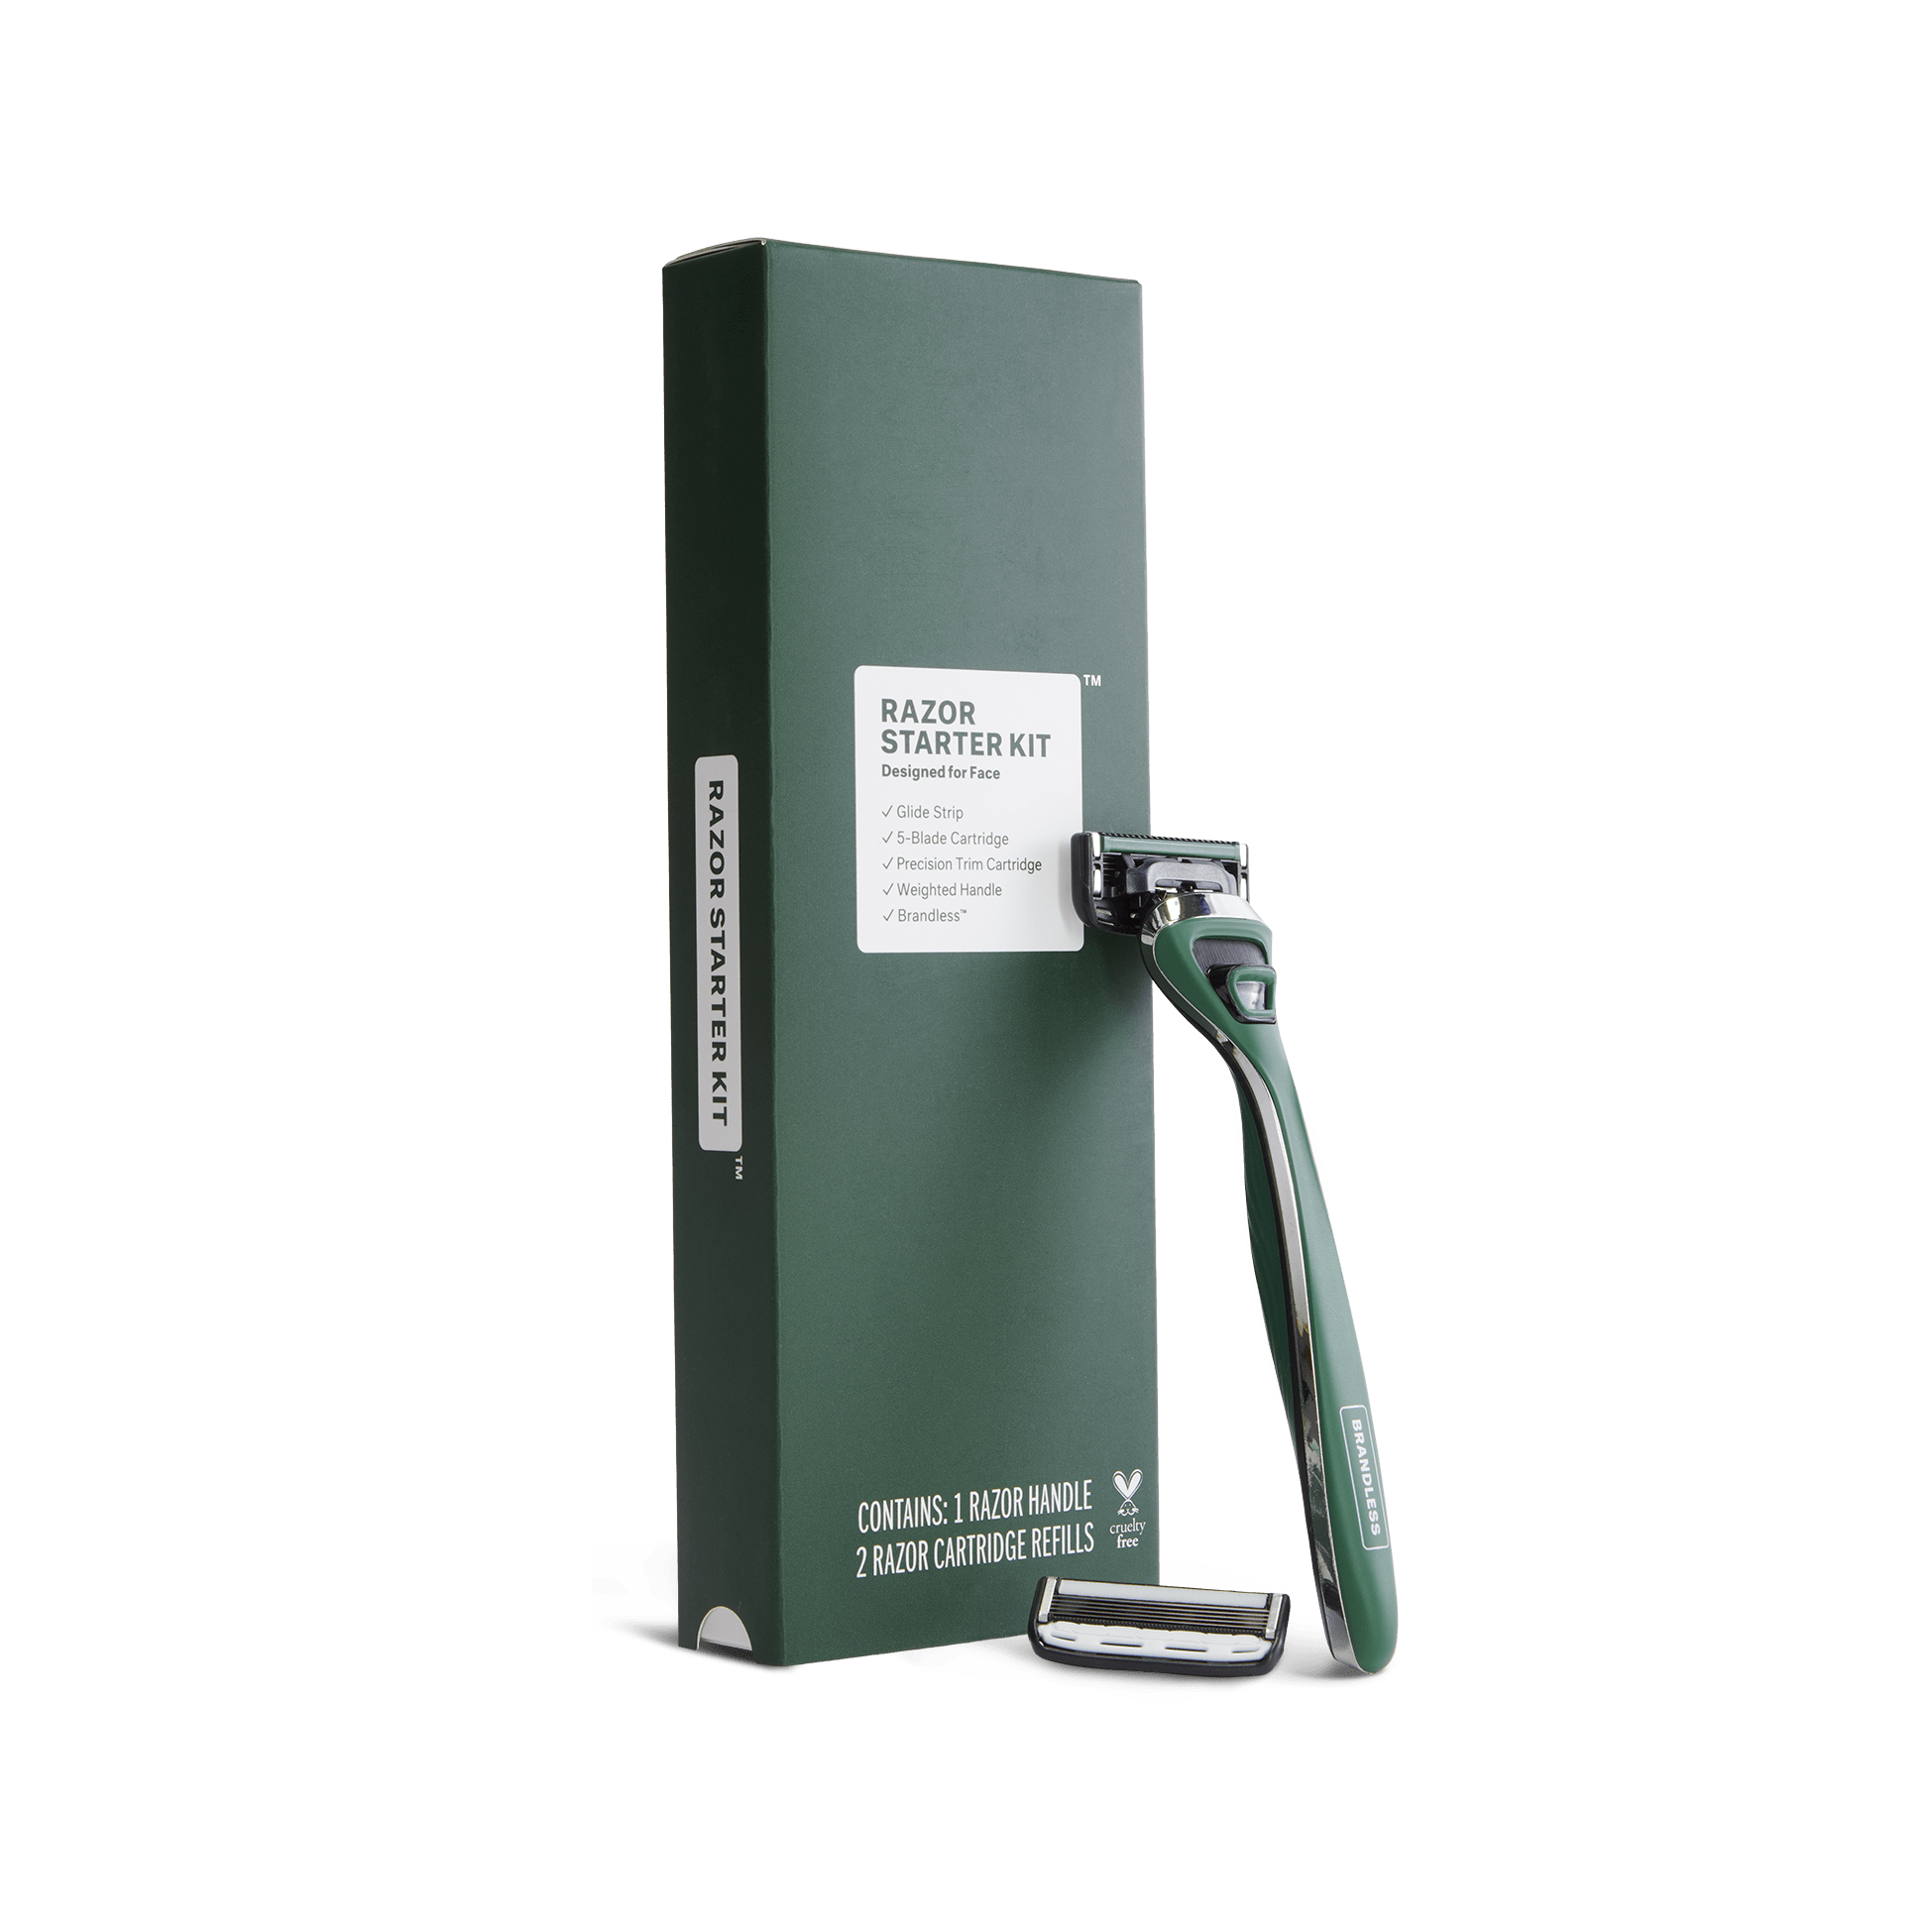 Product photo, brandless razor starter kit for face. Razor leaning up against the starter kit box in a forrest green and silver color, spare cartridge sits next to the handle.